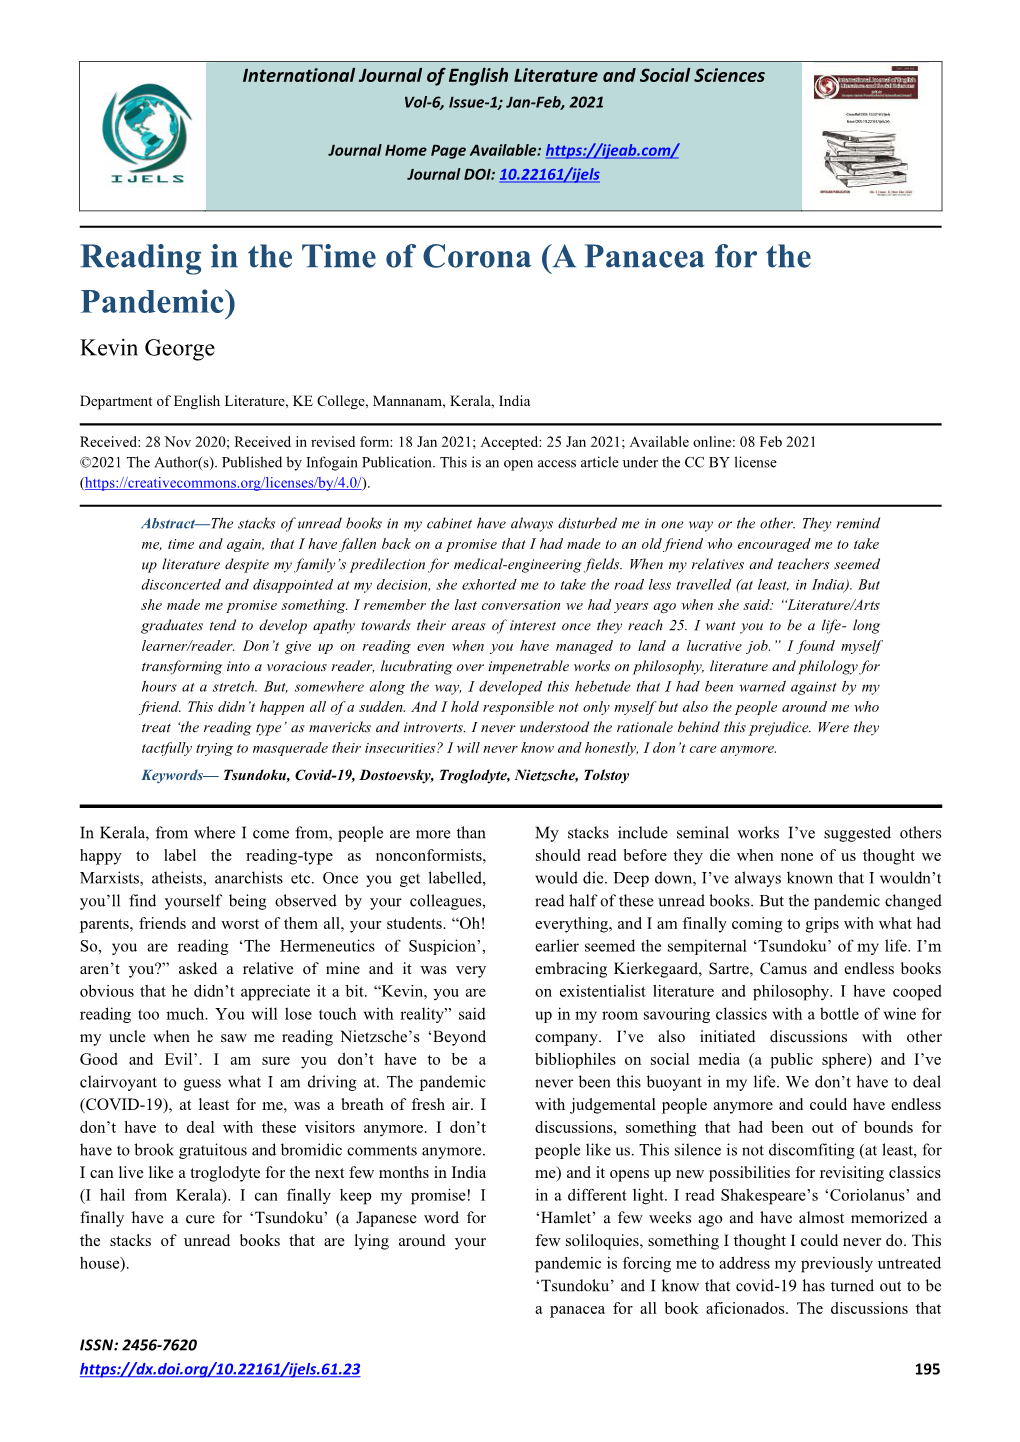 Reading in the Time of Corona (A Panacea for the Pandemic) Kevin George